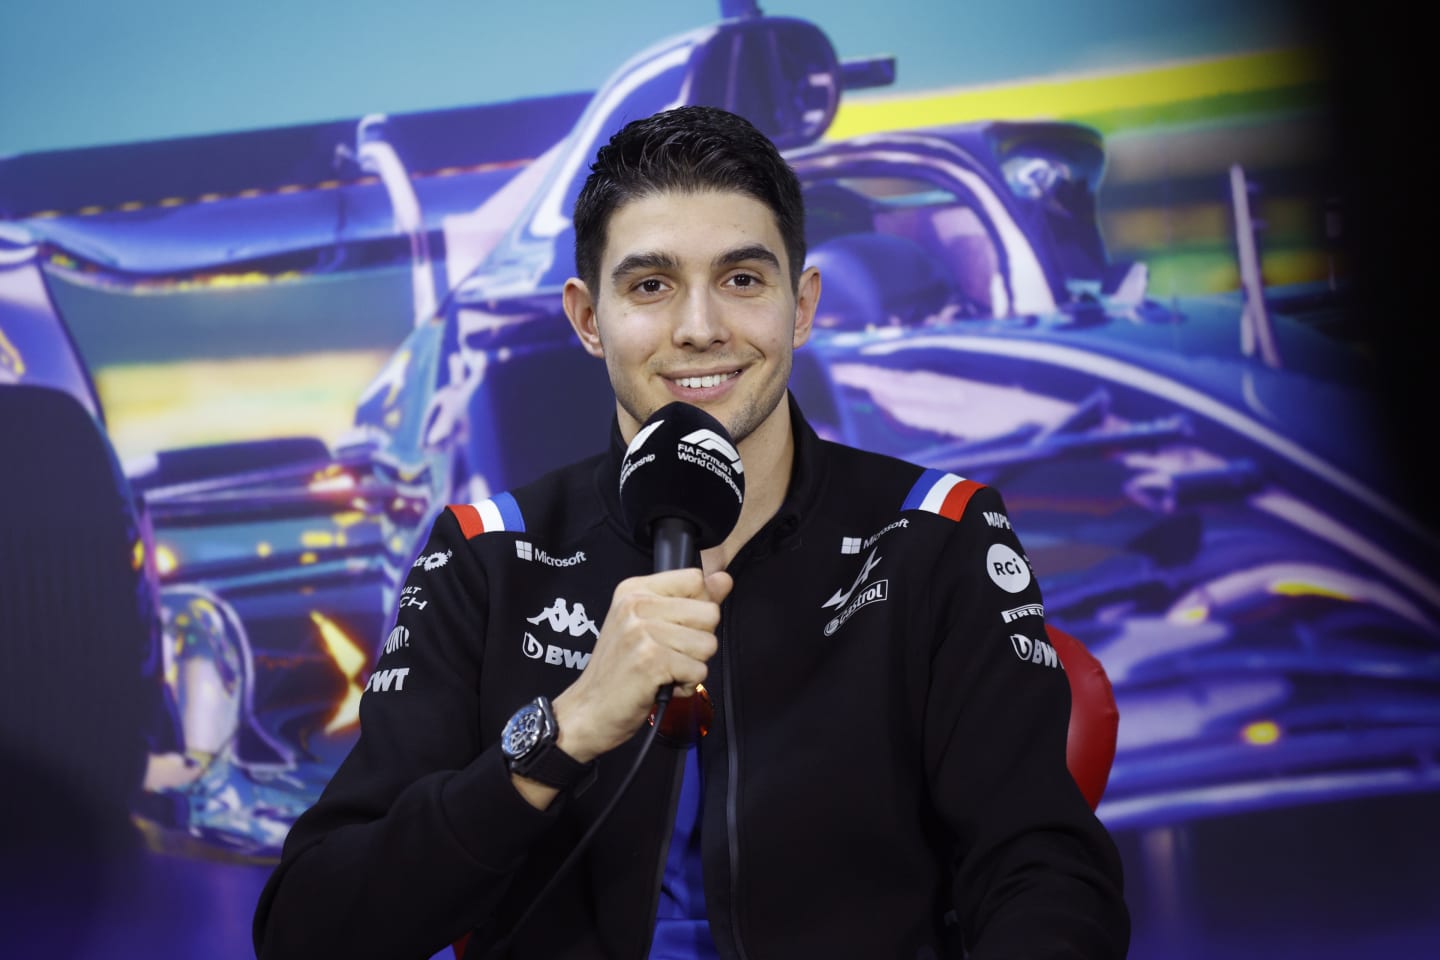 SAO PAULO, BRAZIL - NOVEMBER 10: Esteban Ocon of France and Alpine F1 attends the Drivers Press Conference during previews ahead of the F1 Grand Prix of Brazil at Autodromo Jose Carlos Pace on November 10, 2022 in Sao Paulo, Brazil. (Photo by Jared C. Tilton/Getty Images)